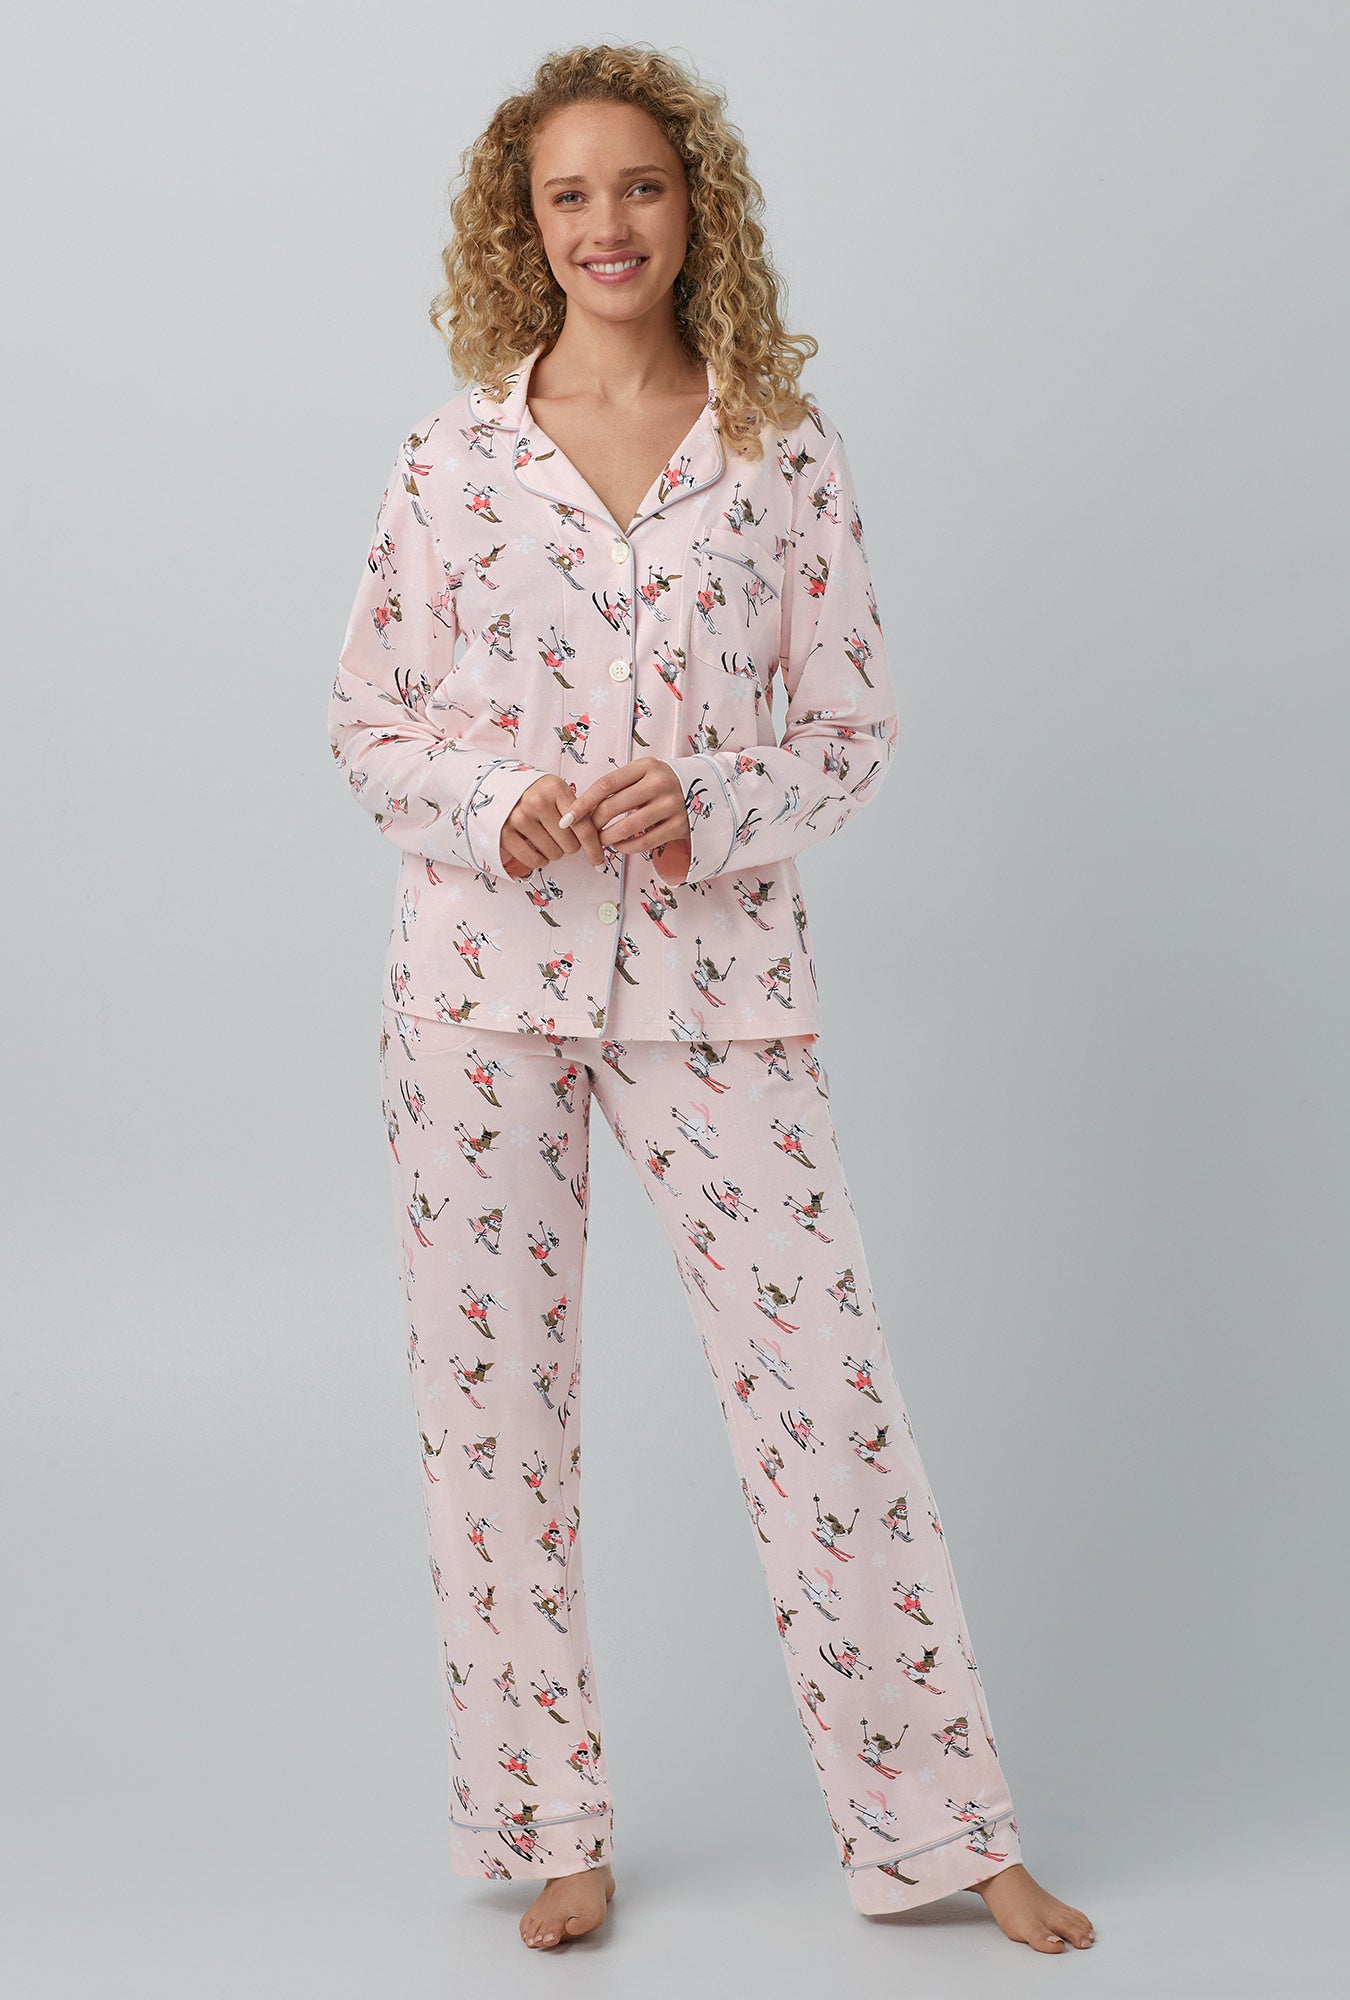 A lady wearing pink long sleeve classic stretch jersey pj set with ski bunnies print.